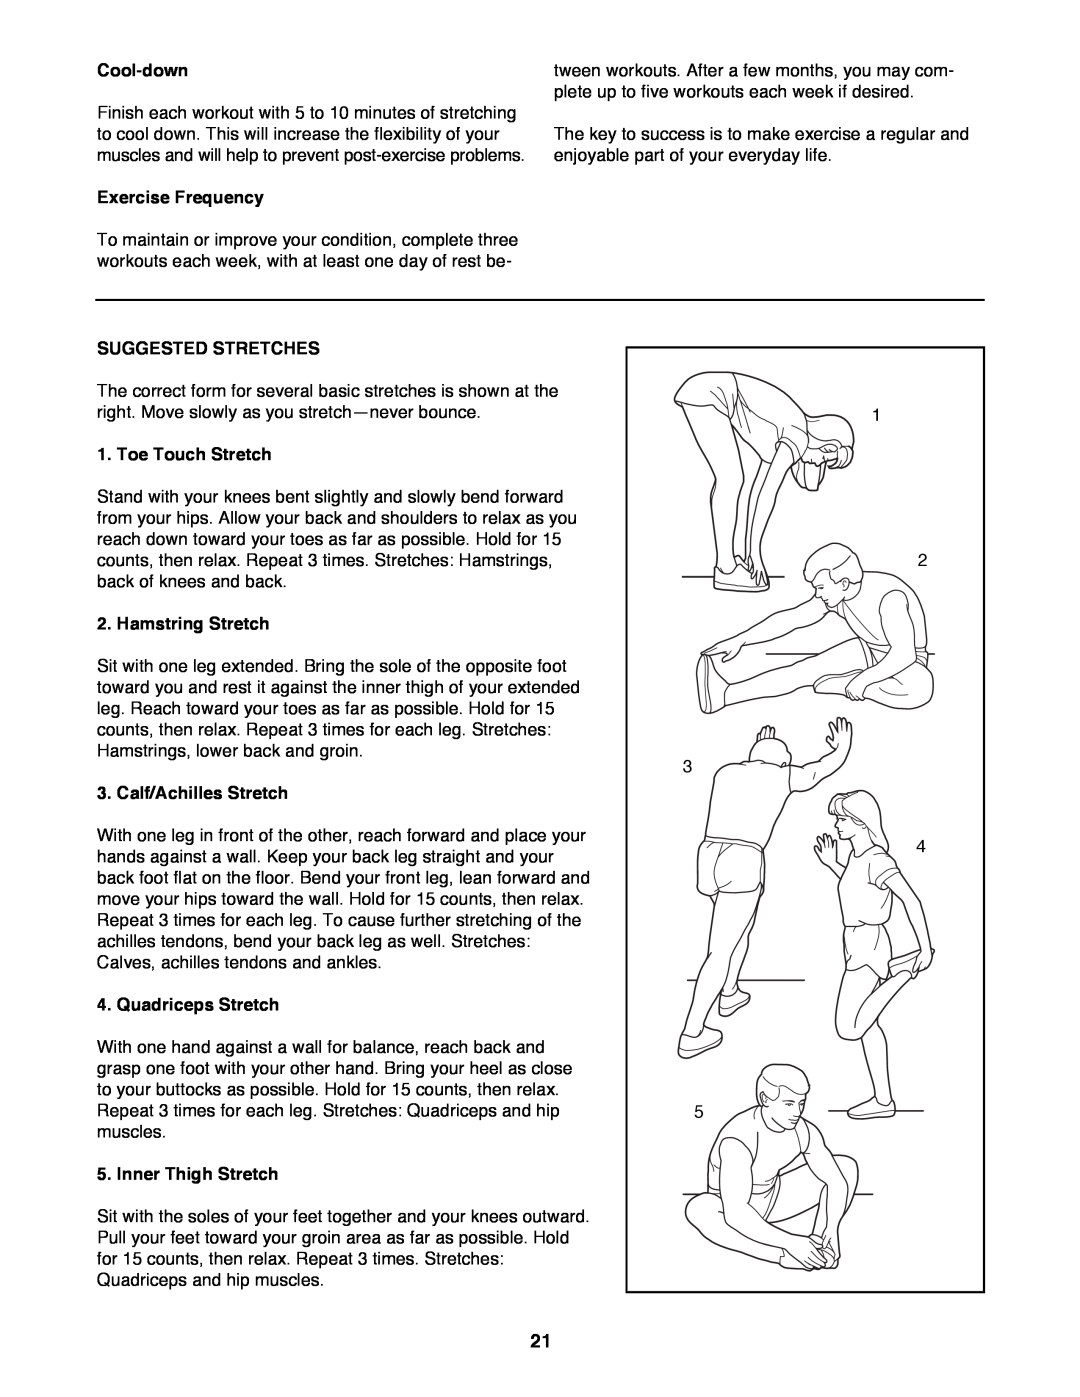 Image 831.297572 user manual Cool-down, Exercise Frequency, Suggested Stretches, Toe Touch Stretch, Hamstring Stretch 